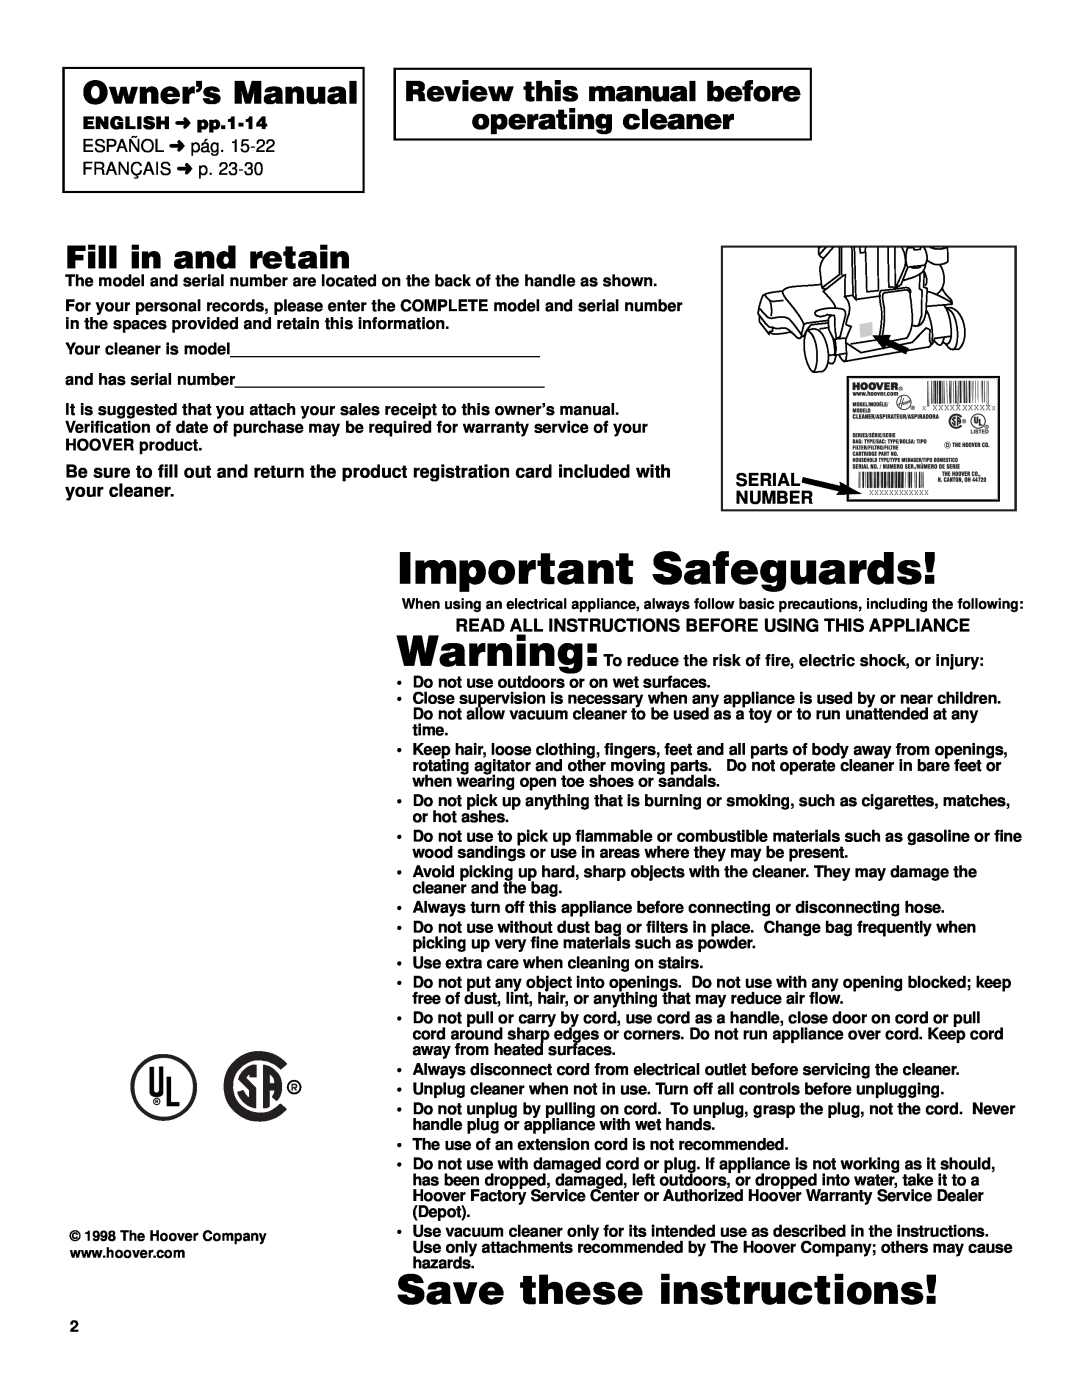 Hoover UH70600 manual Important Safeguards, Save these instructions, Owner’s Manual, Fill in and retain, ENGLISH pp.1-14 